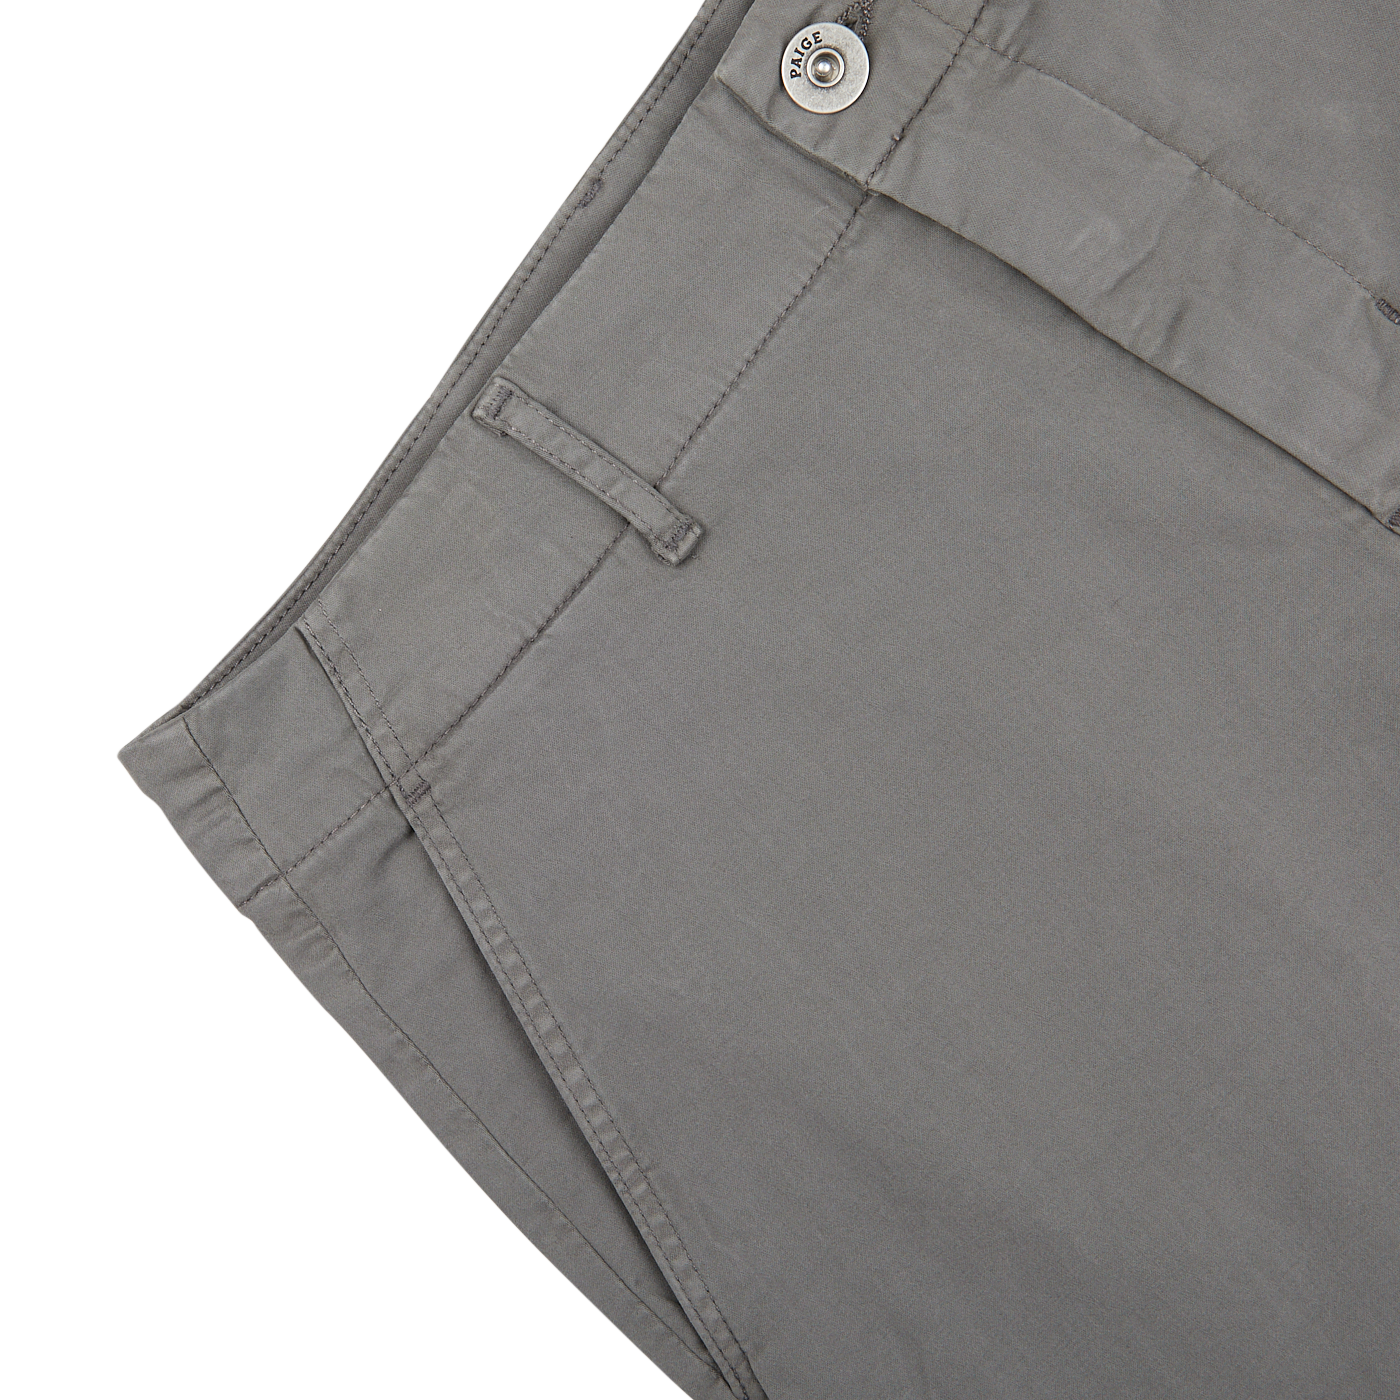 Close-up of a Slate Grey Cotton Blend Phillips Shorts pocket with a button on a white background.